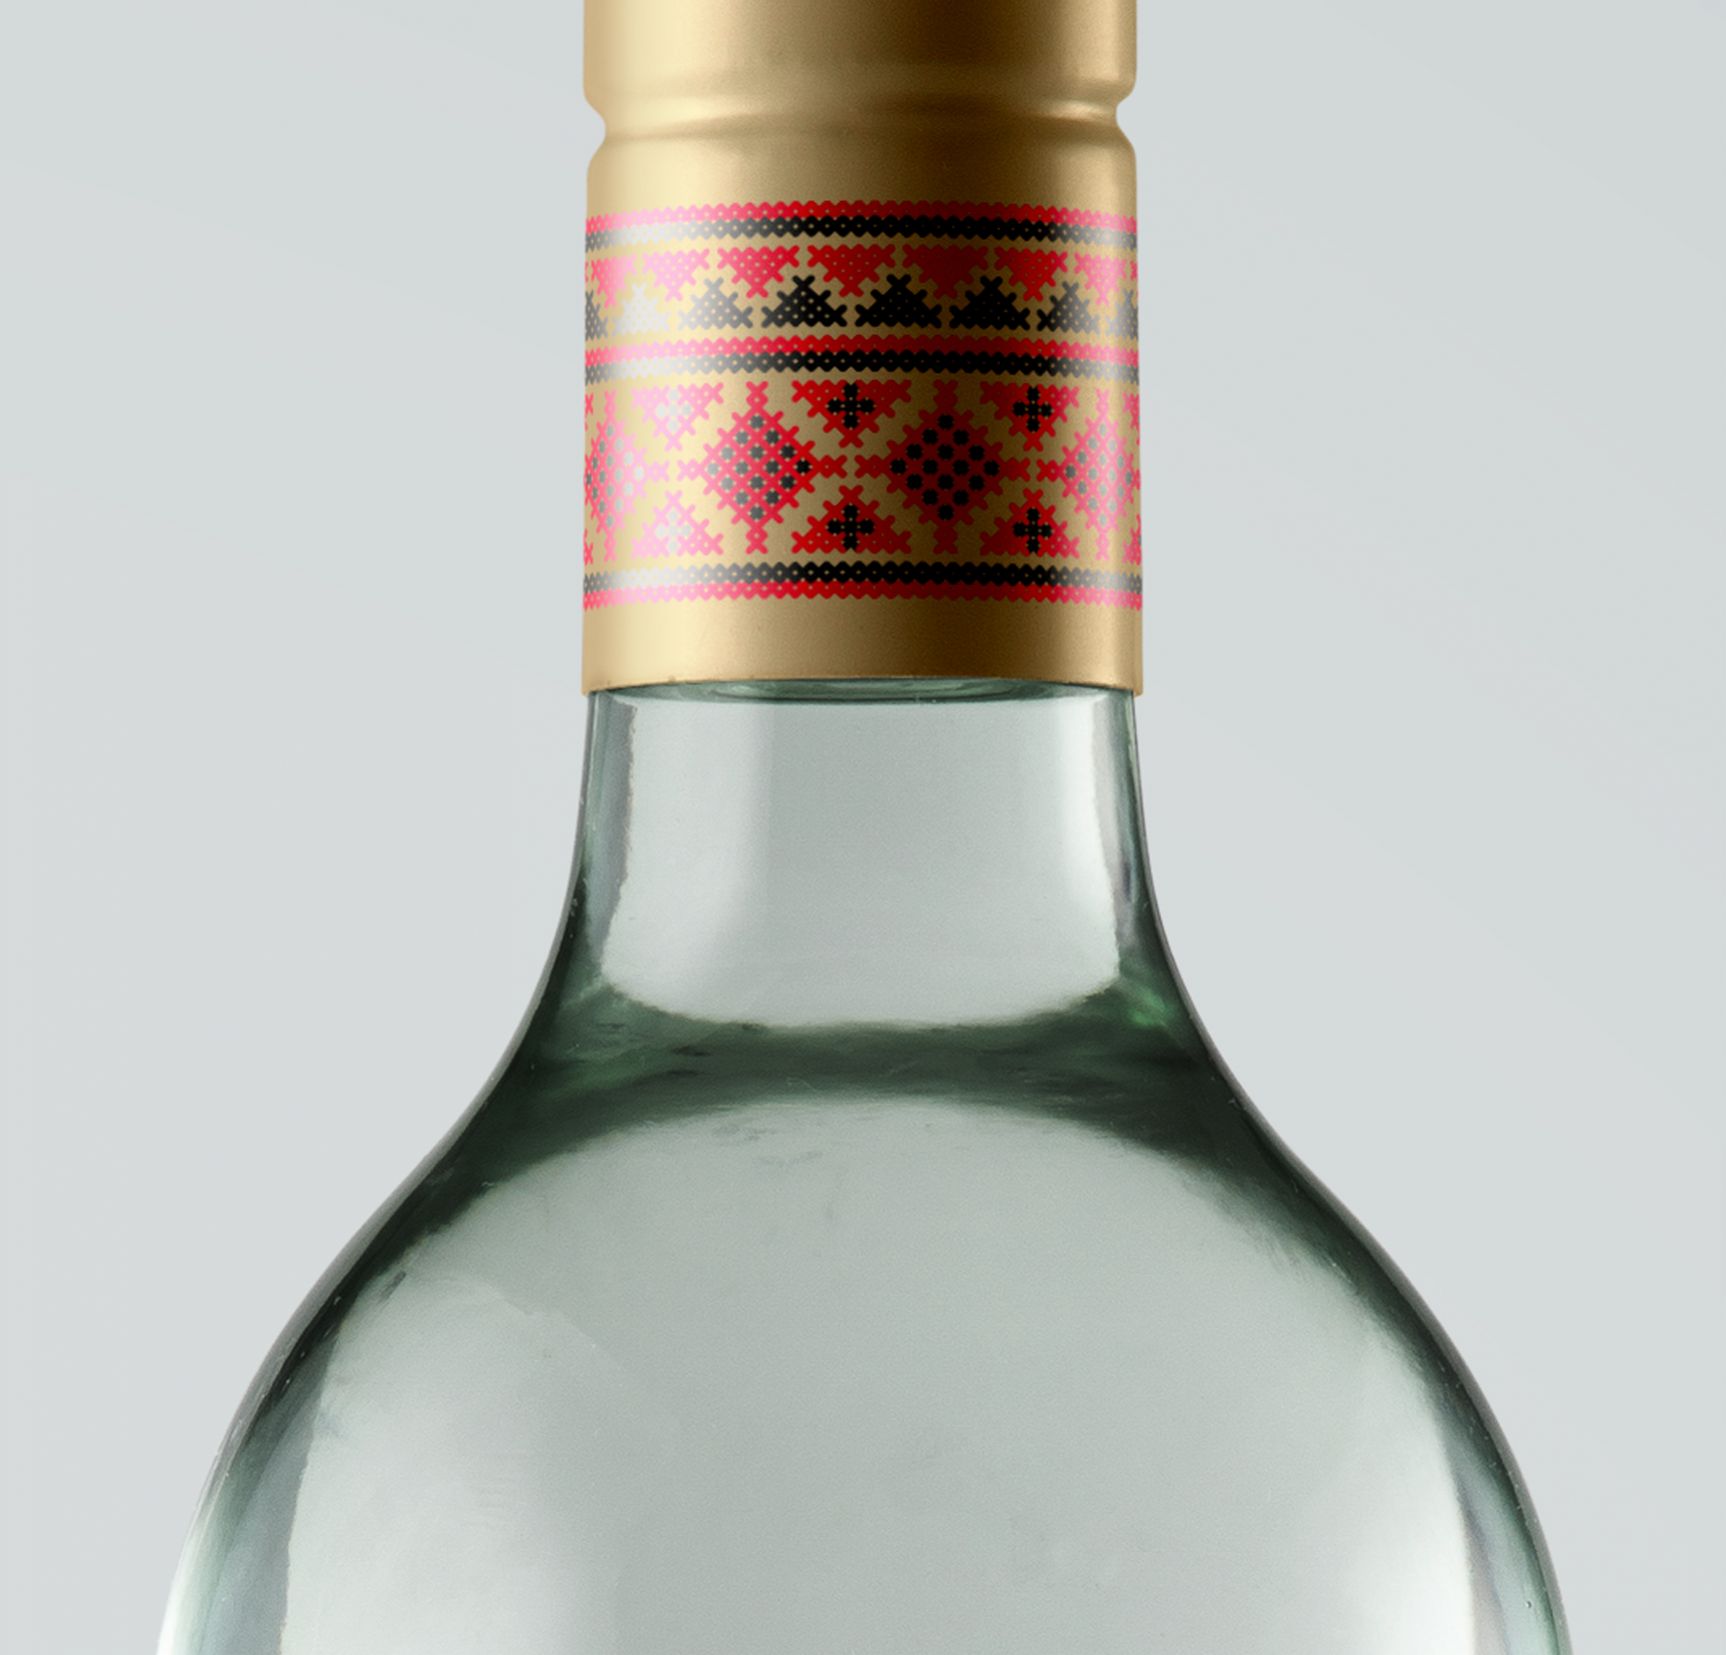 Tequila Silver Blanco Packaging